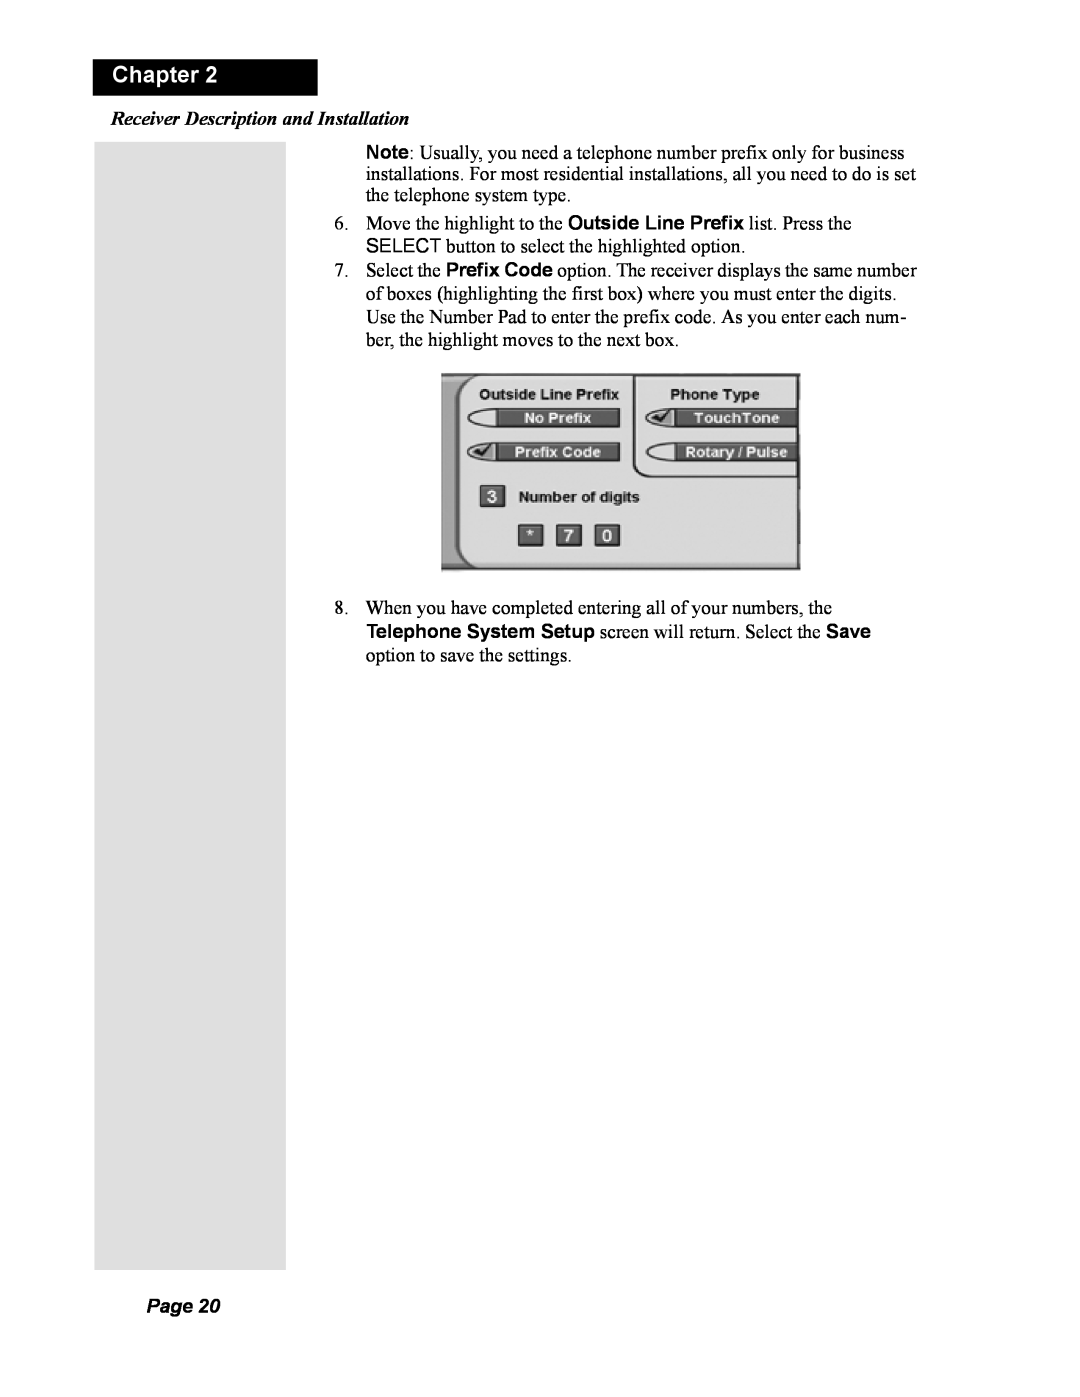 Dish Network DISH 351 manual Chapter, Receiver Description and Installation, Page 